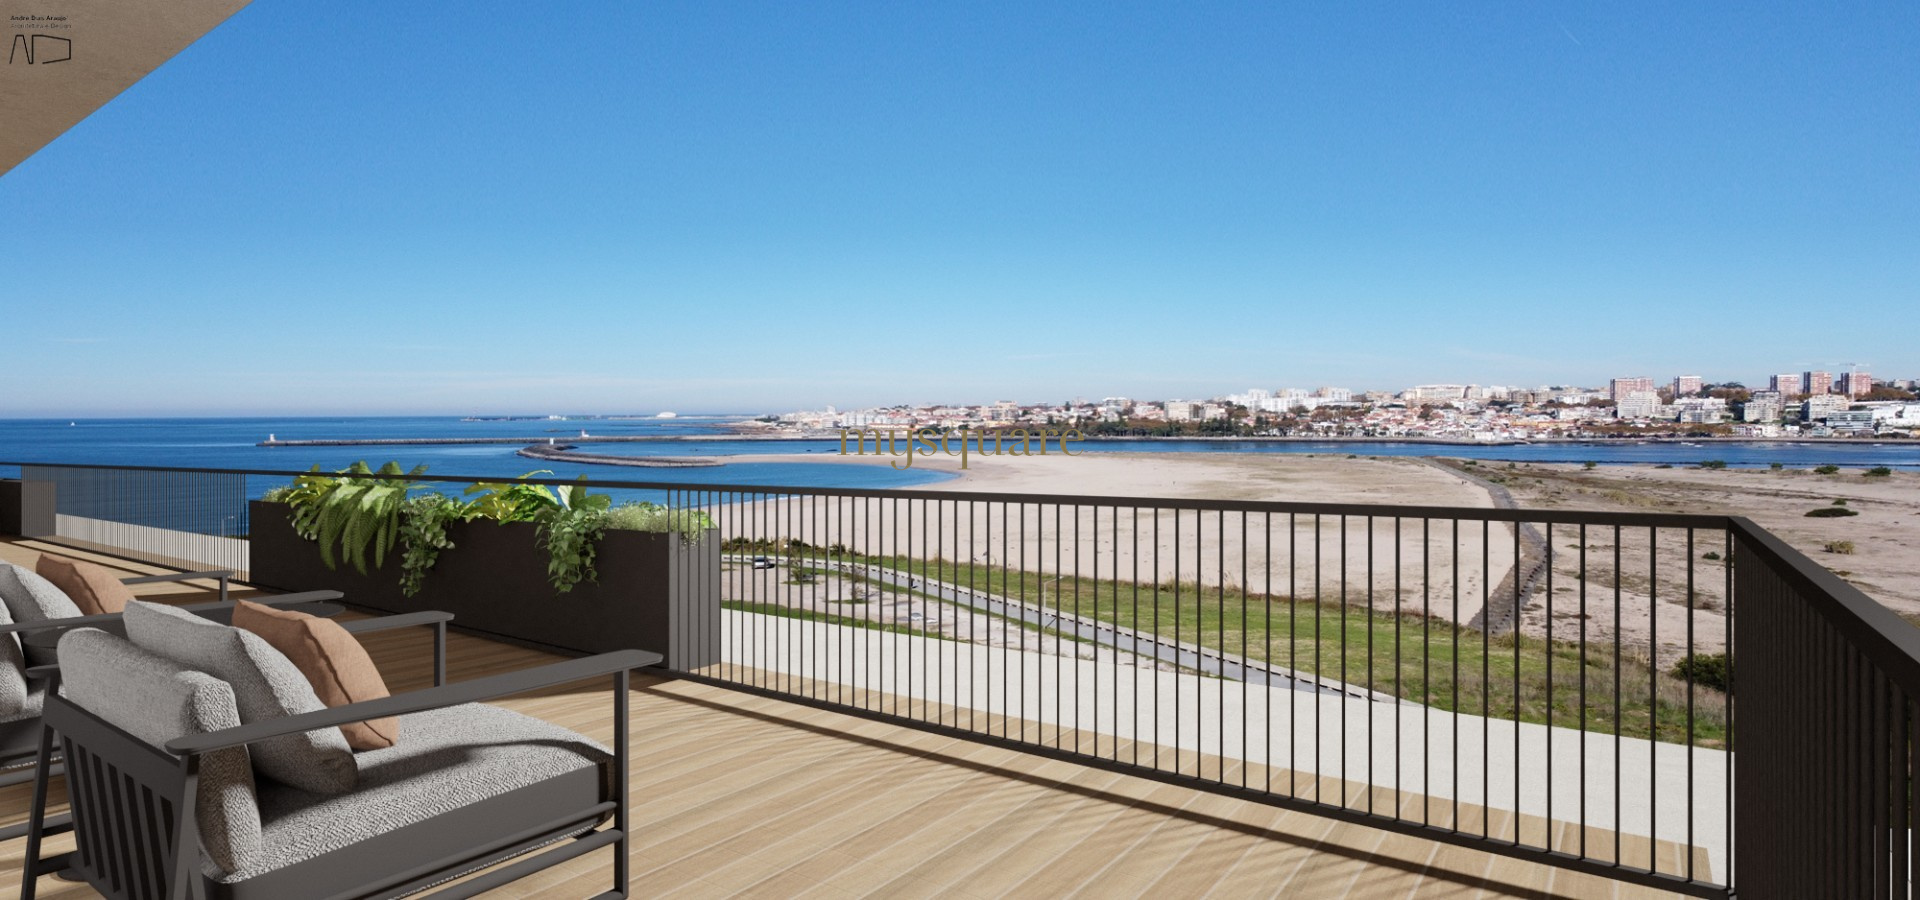 Luxury 2 bedroom apartment with sea and river views - Seca do Bacalhau, Canidelo